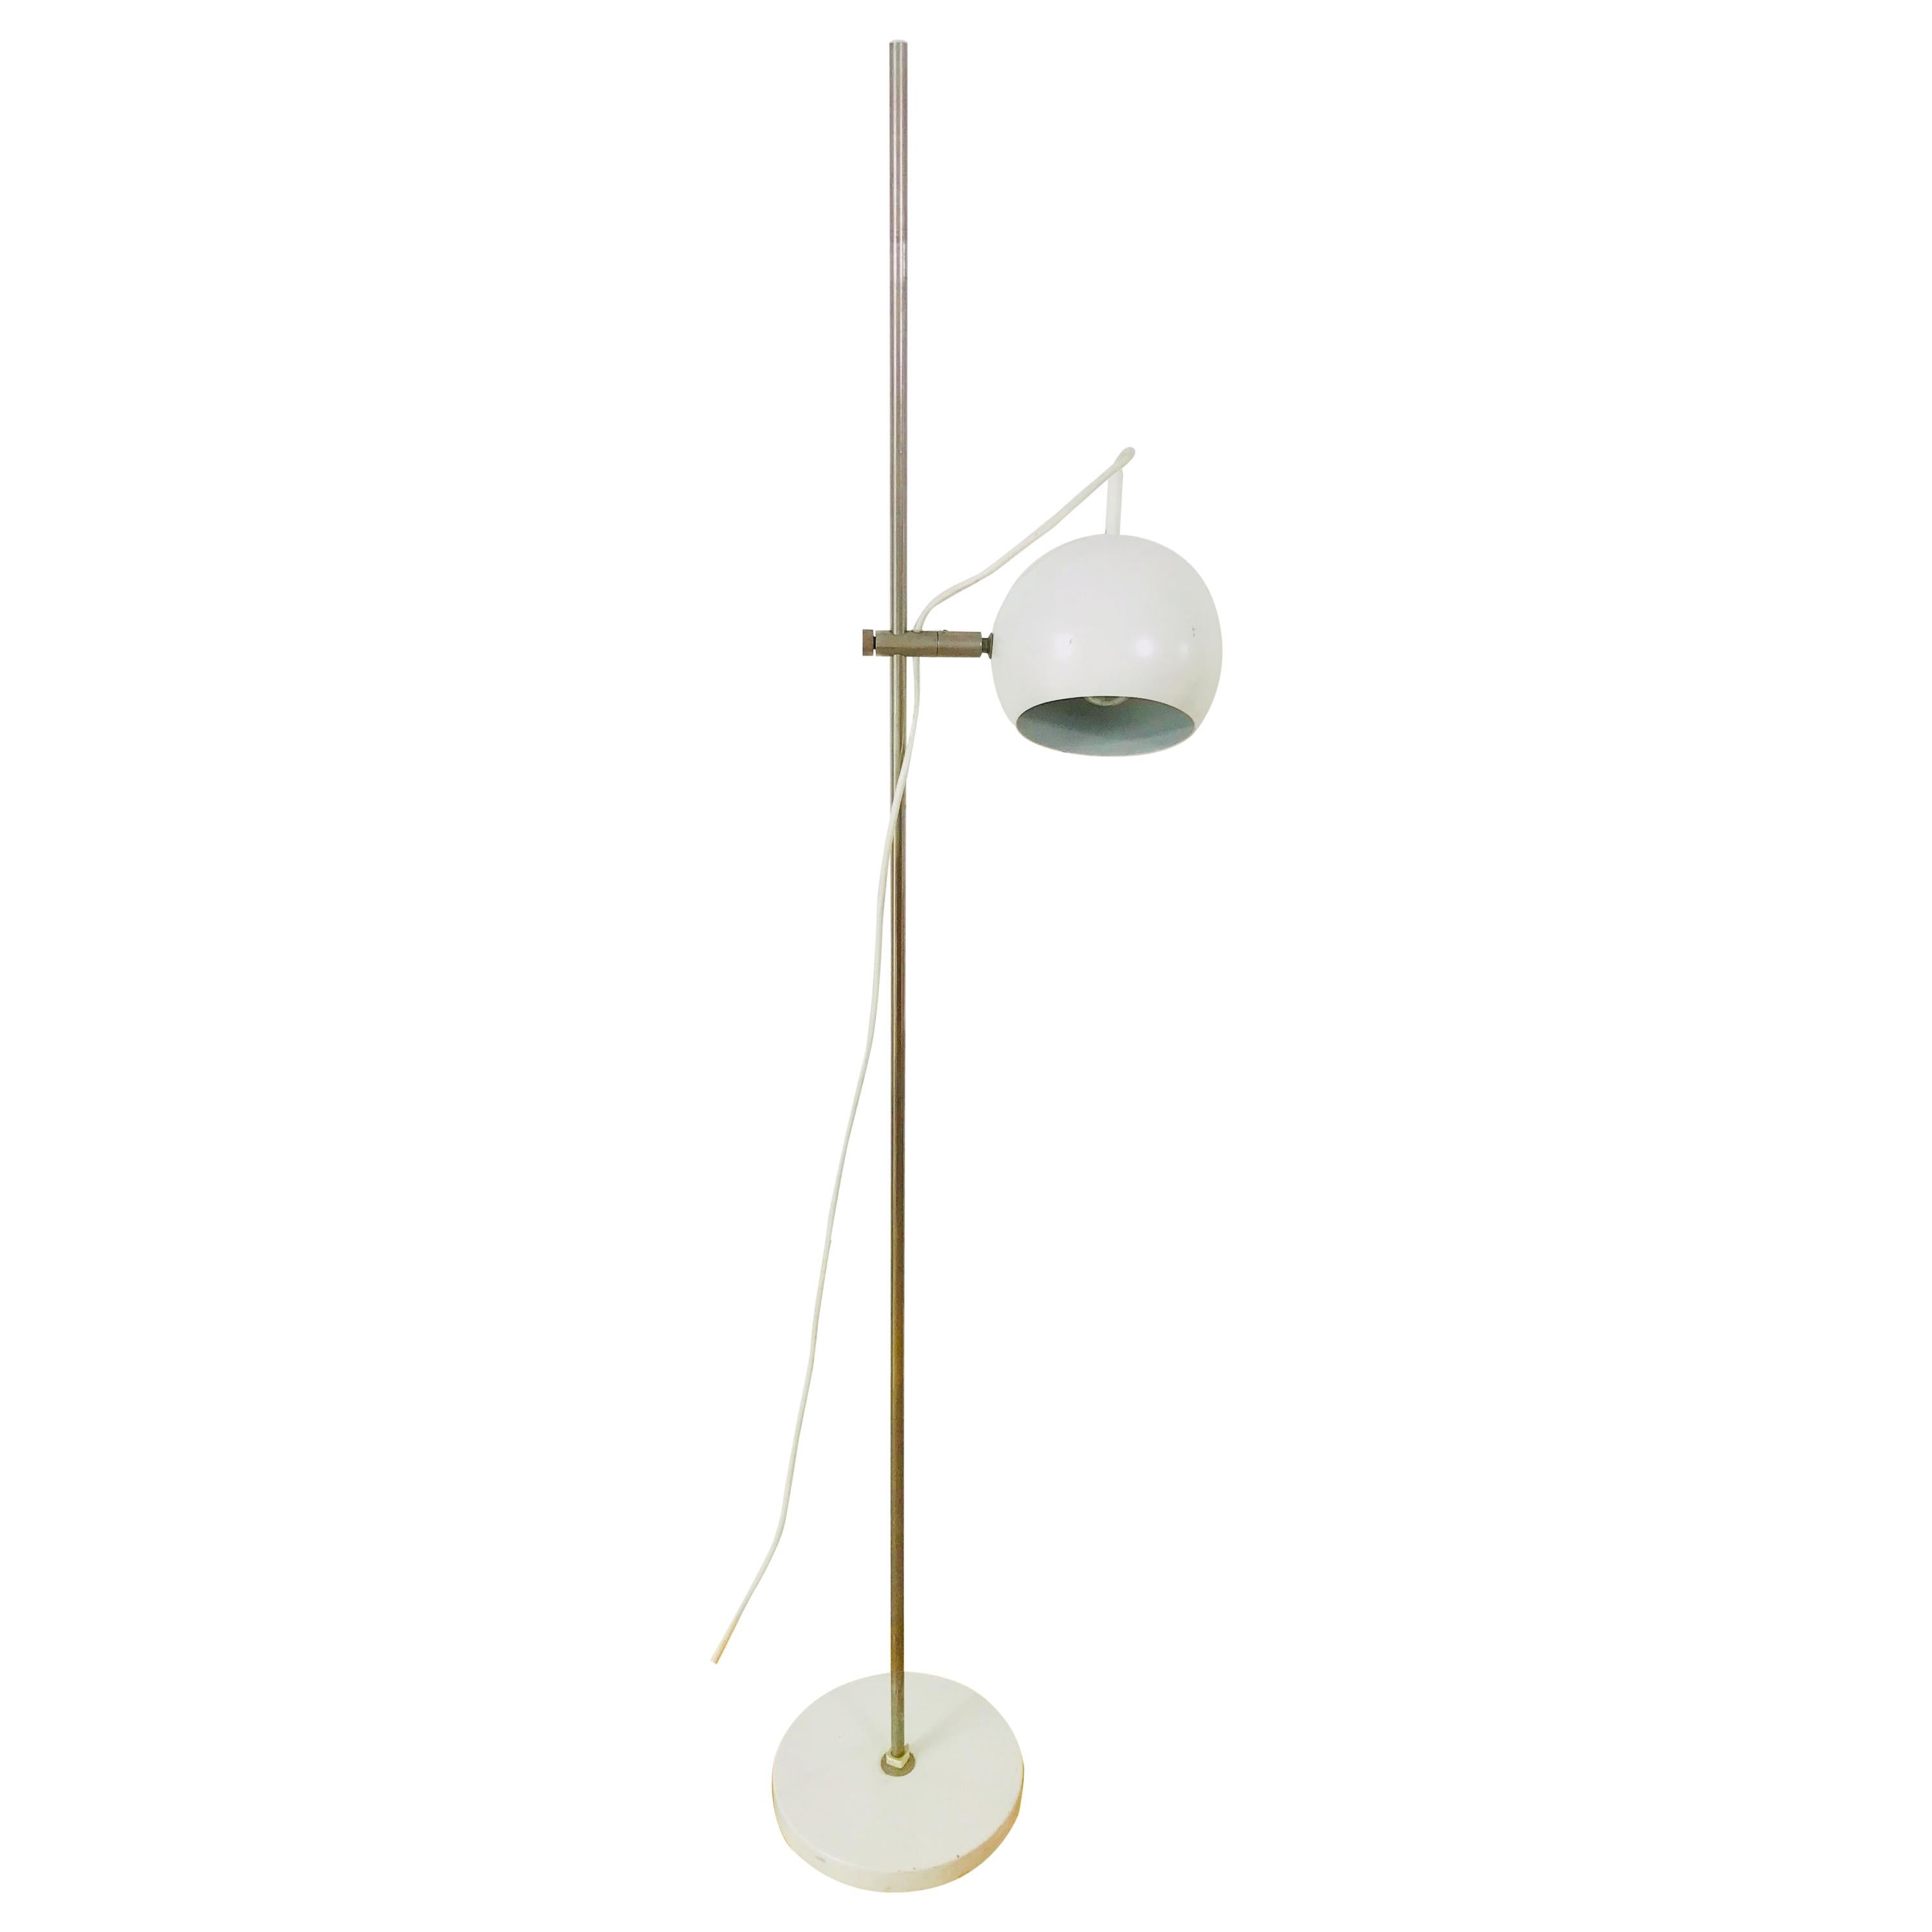 Midcentury White Floor Lamp in the Style of Joe Colombo, 1960s For Sale